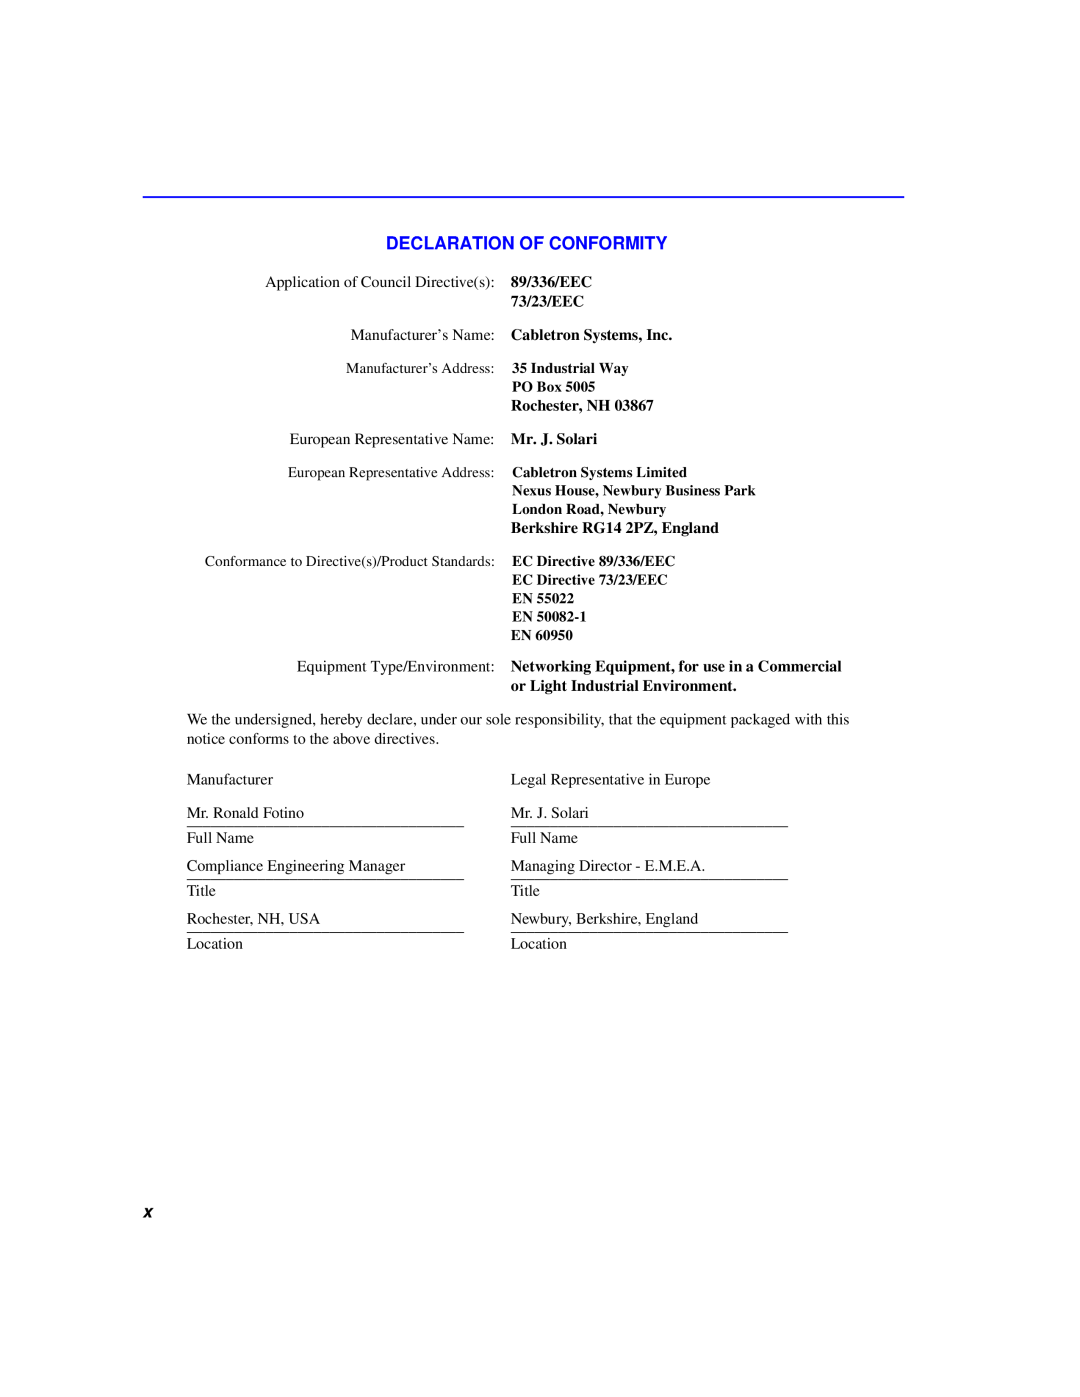 Cabletron Systems 6000 Declaration Of Conformity, 73/23/EEC Manufacturer’s Name Cabletron Systems, Inc, Rochester, NH 